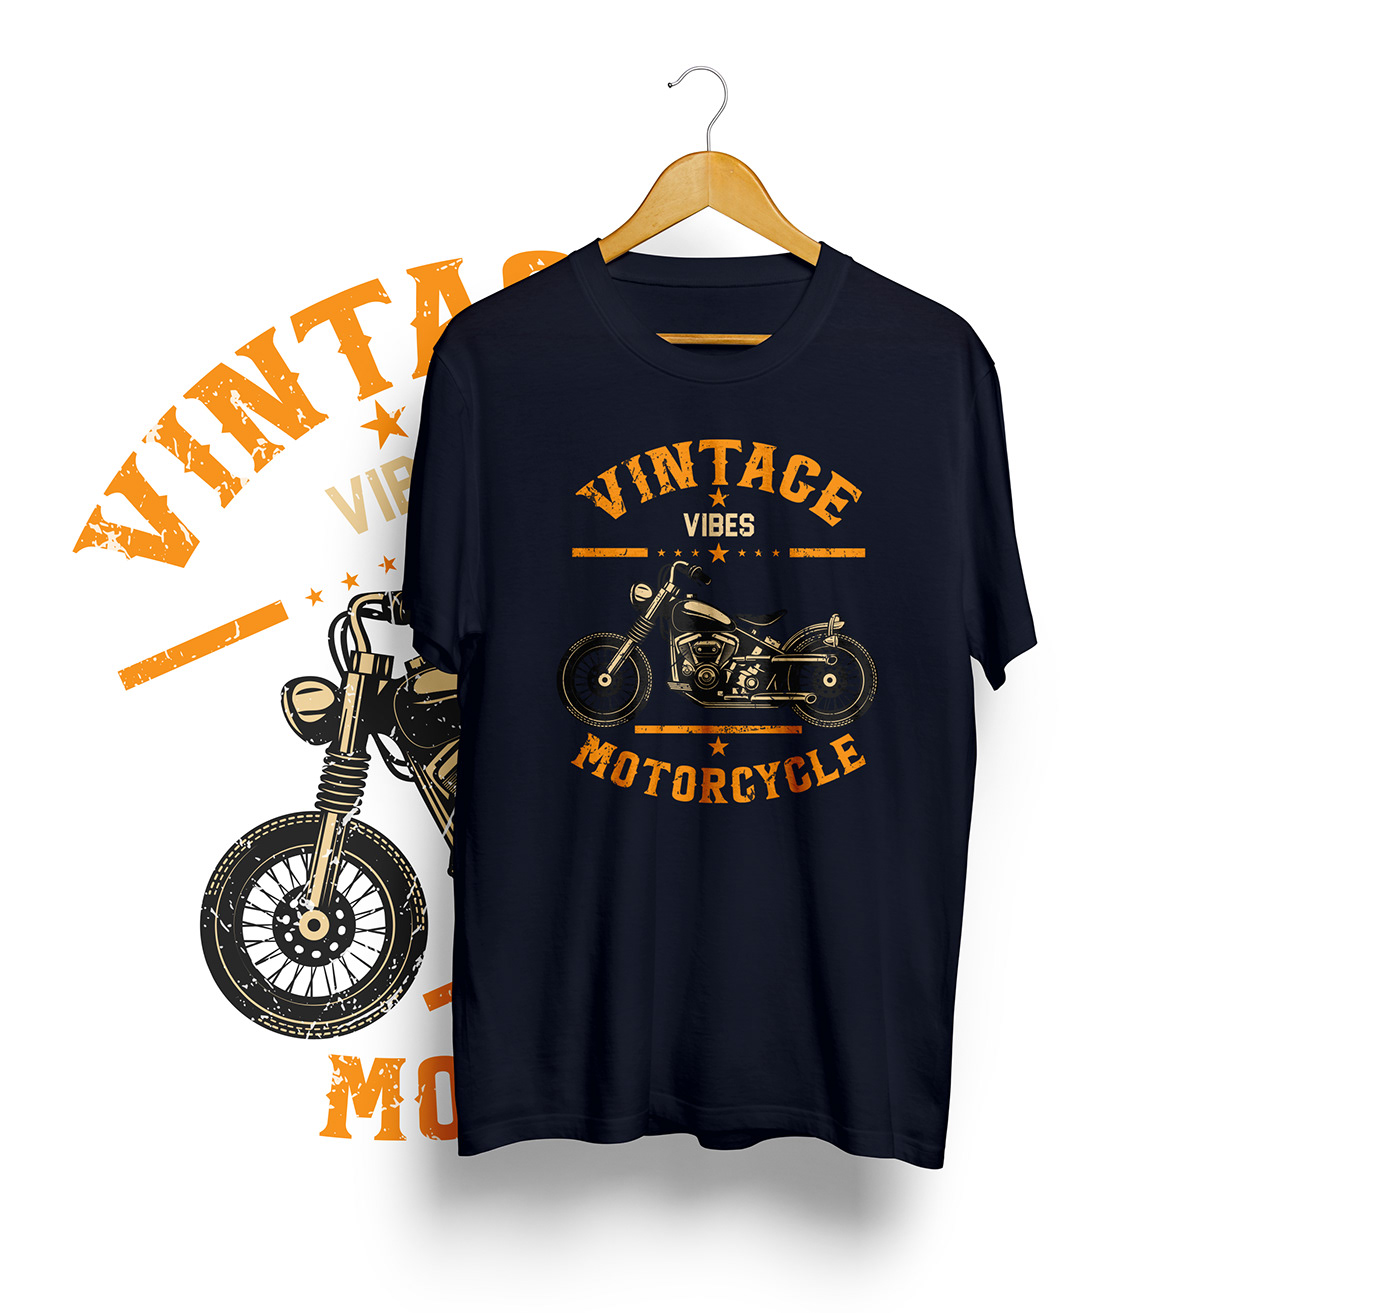 vintage motorcycle typography   graphic design  t-shirt tshirt T-Shirt Design text branding  old